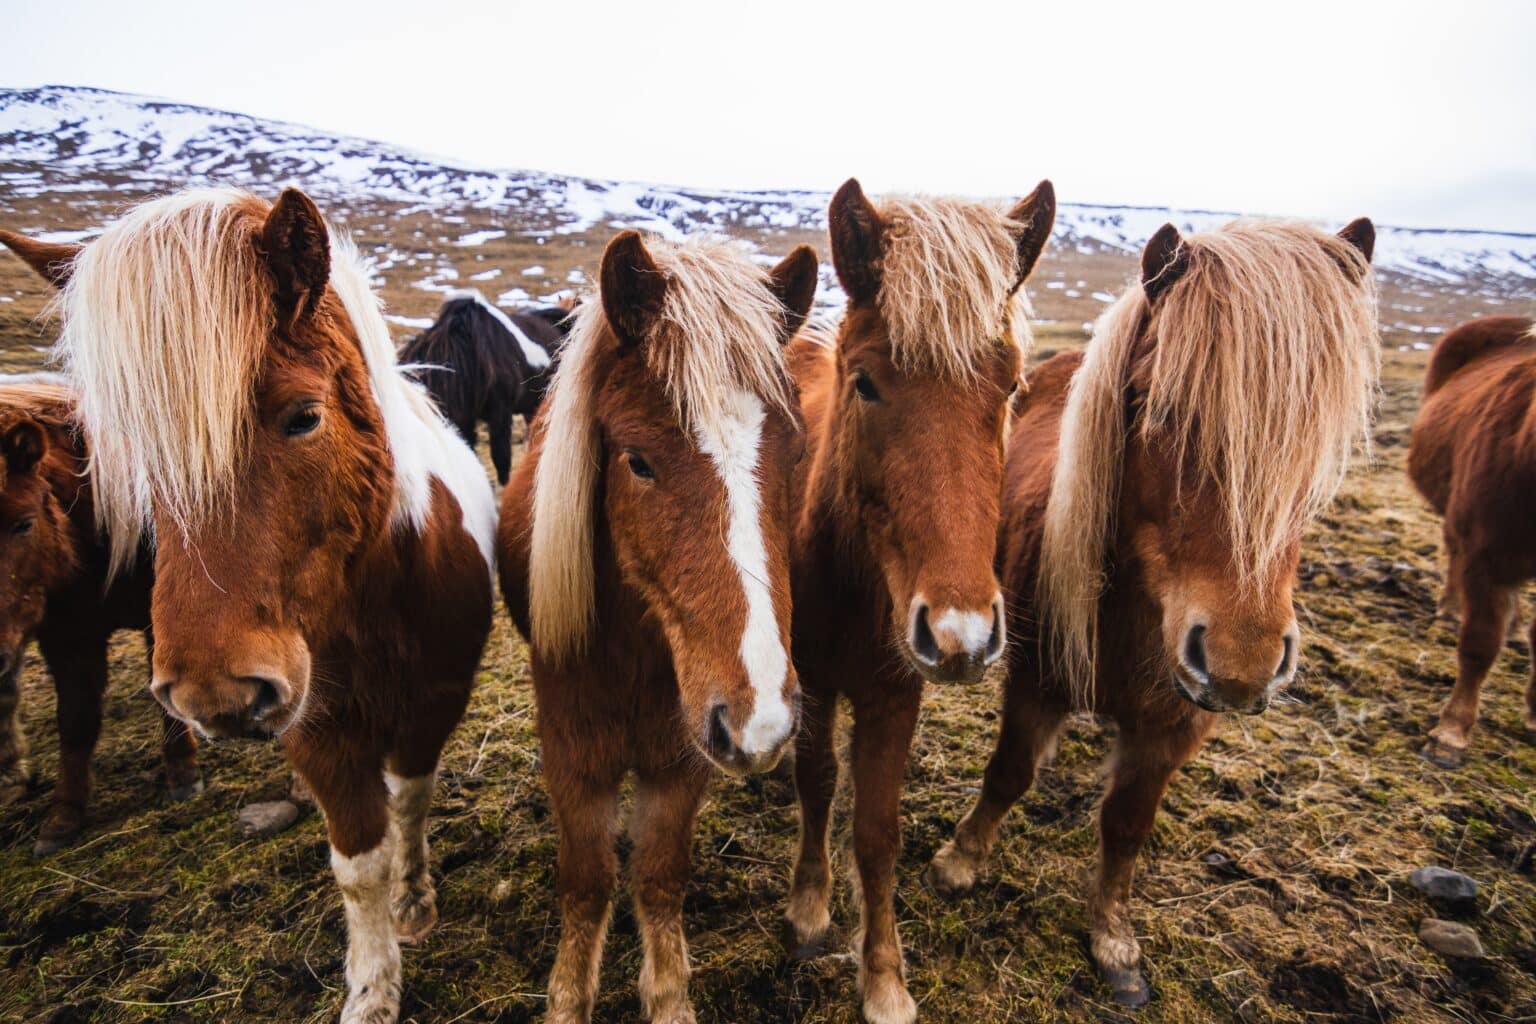 A closeup of Icelandic horses in a field covered in snow and grass under a cloudy sky in Iceland